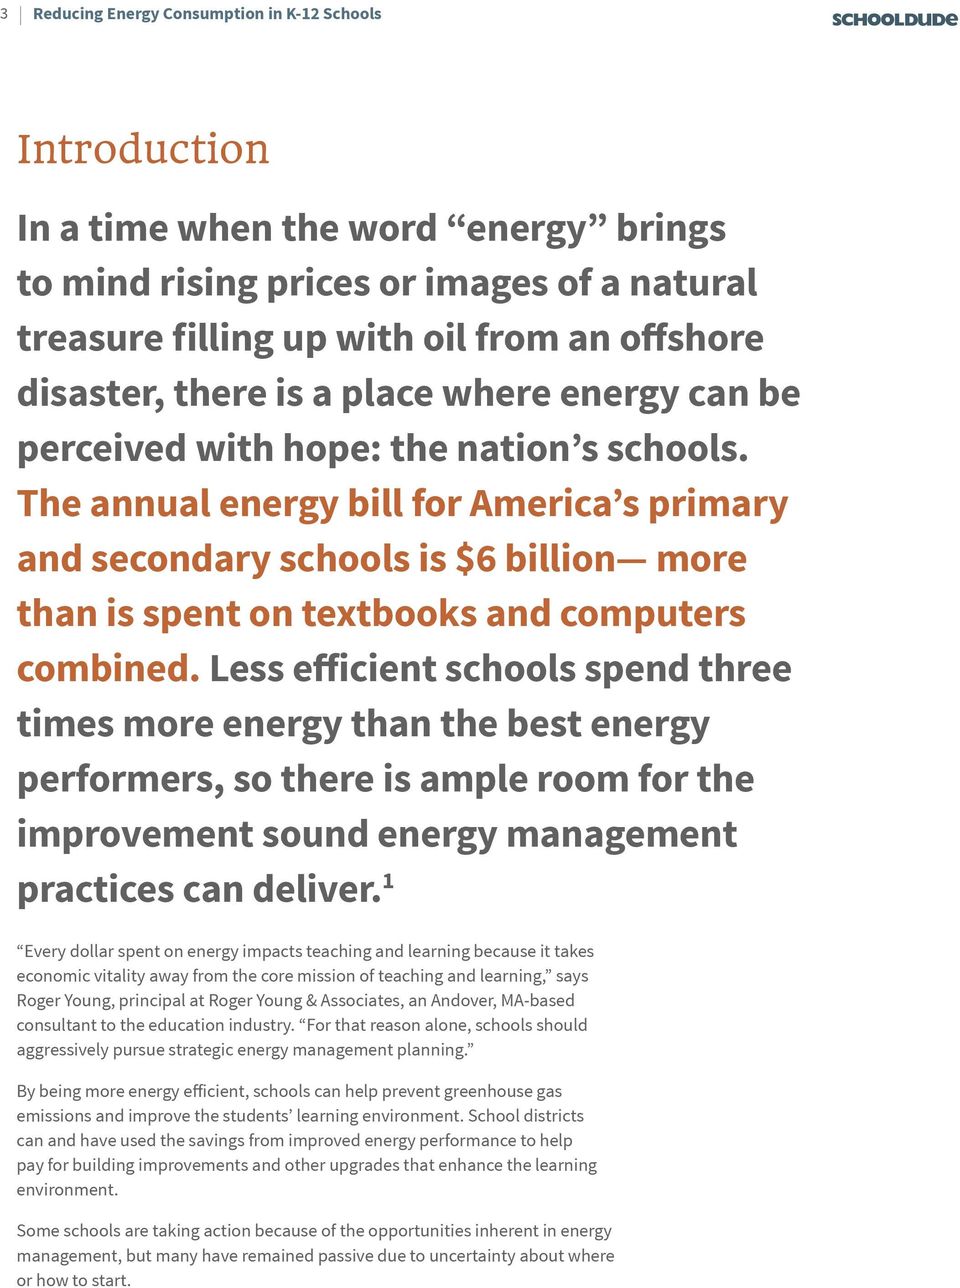 Less efficient schools spend three times more energy than the best energy performers, so there is ample room for the improvement sound energy management practices can deliver.